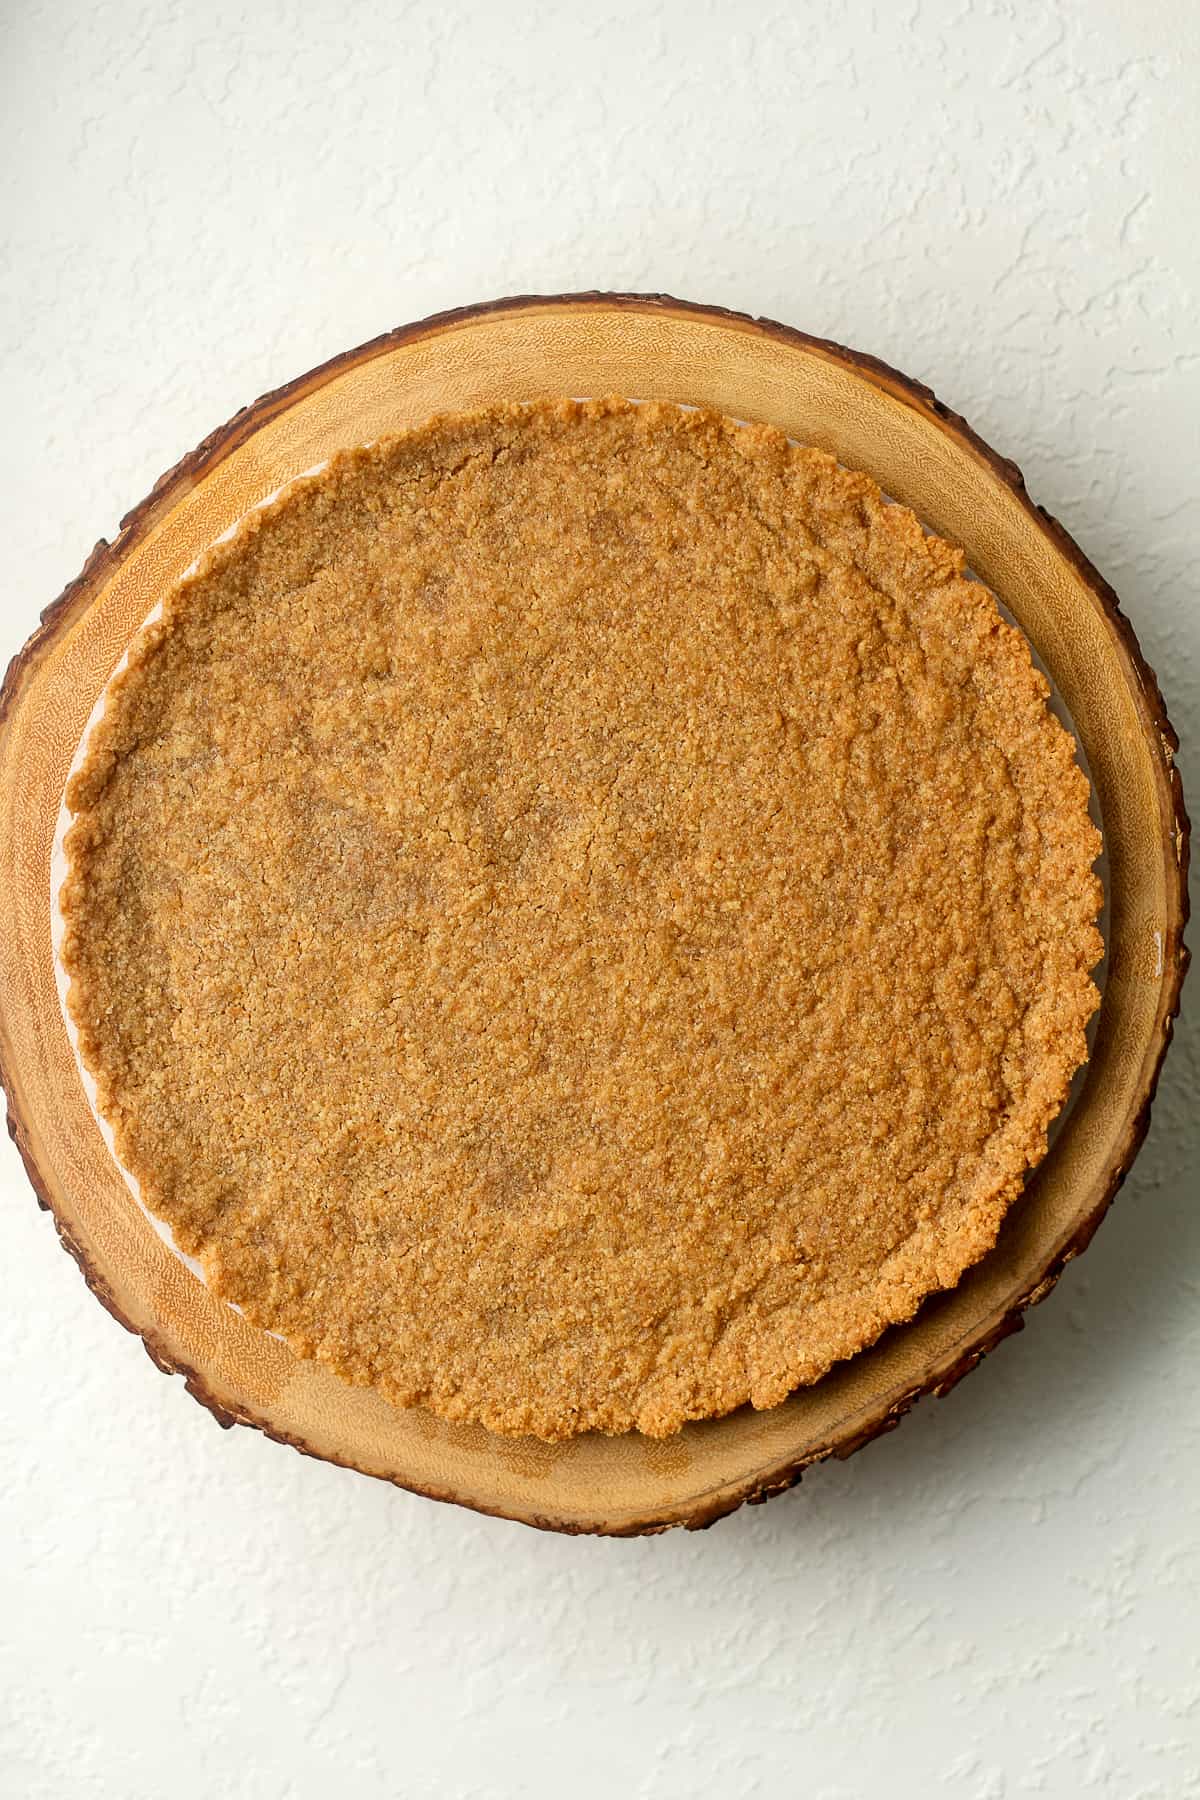 A graham cracker crust on a wooden cake stand.